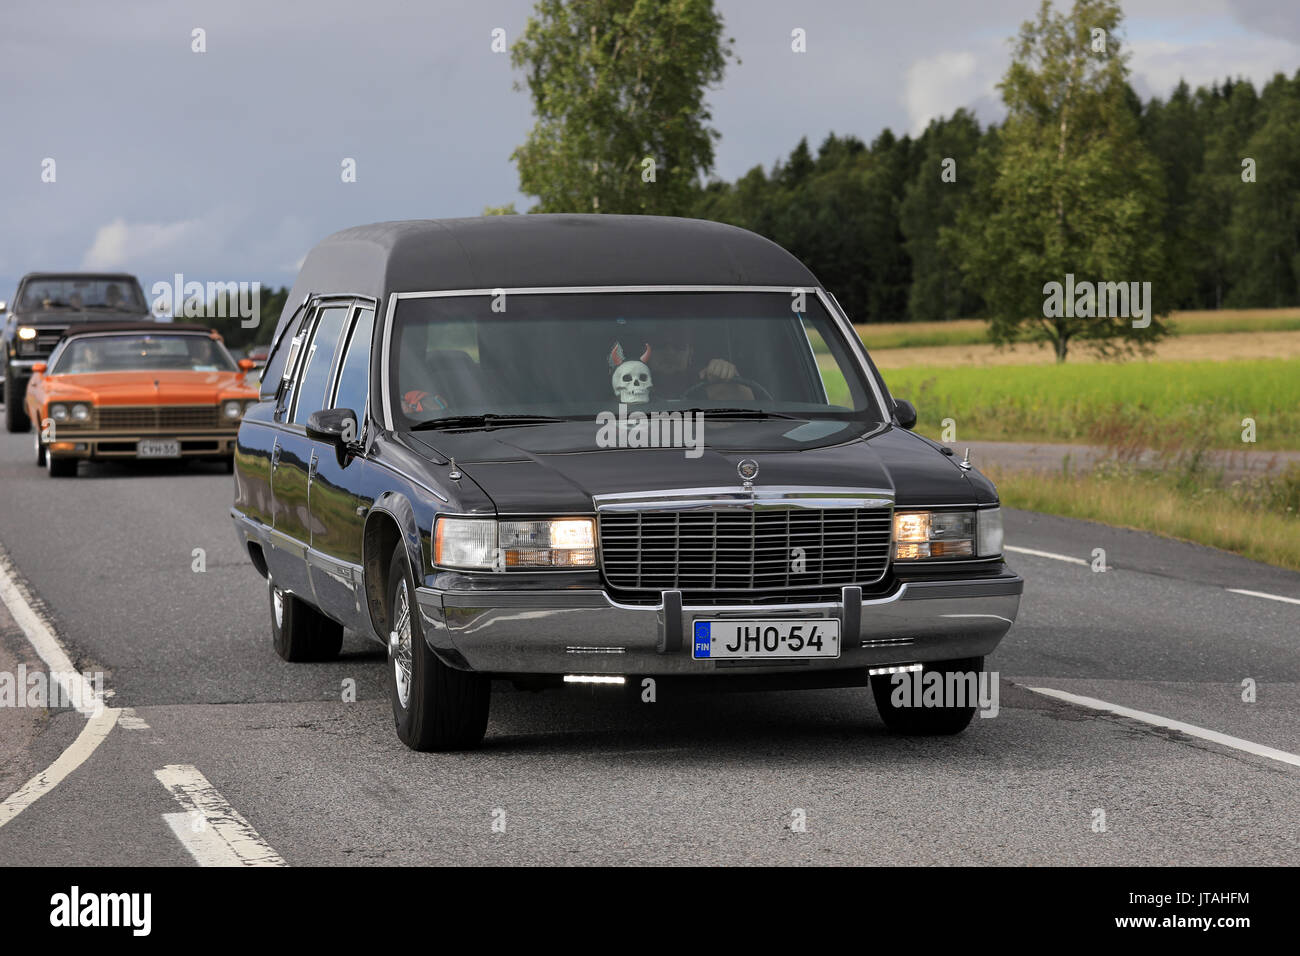 SOMERO, FINLAND - AUGUST 5, 2017: Tuned Cadillac Fleetwood funeral car with led lights and skull detail moves along scenic highway on Maisemaruise 201 Stock Photo